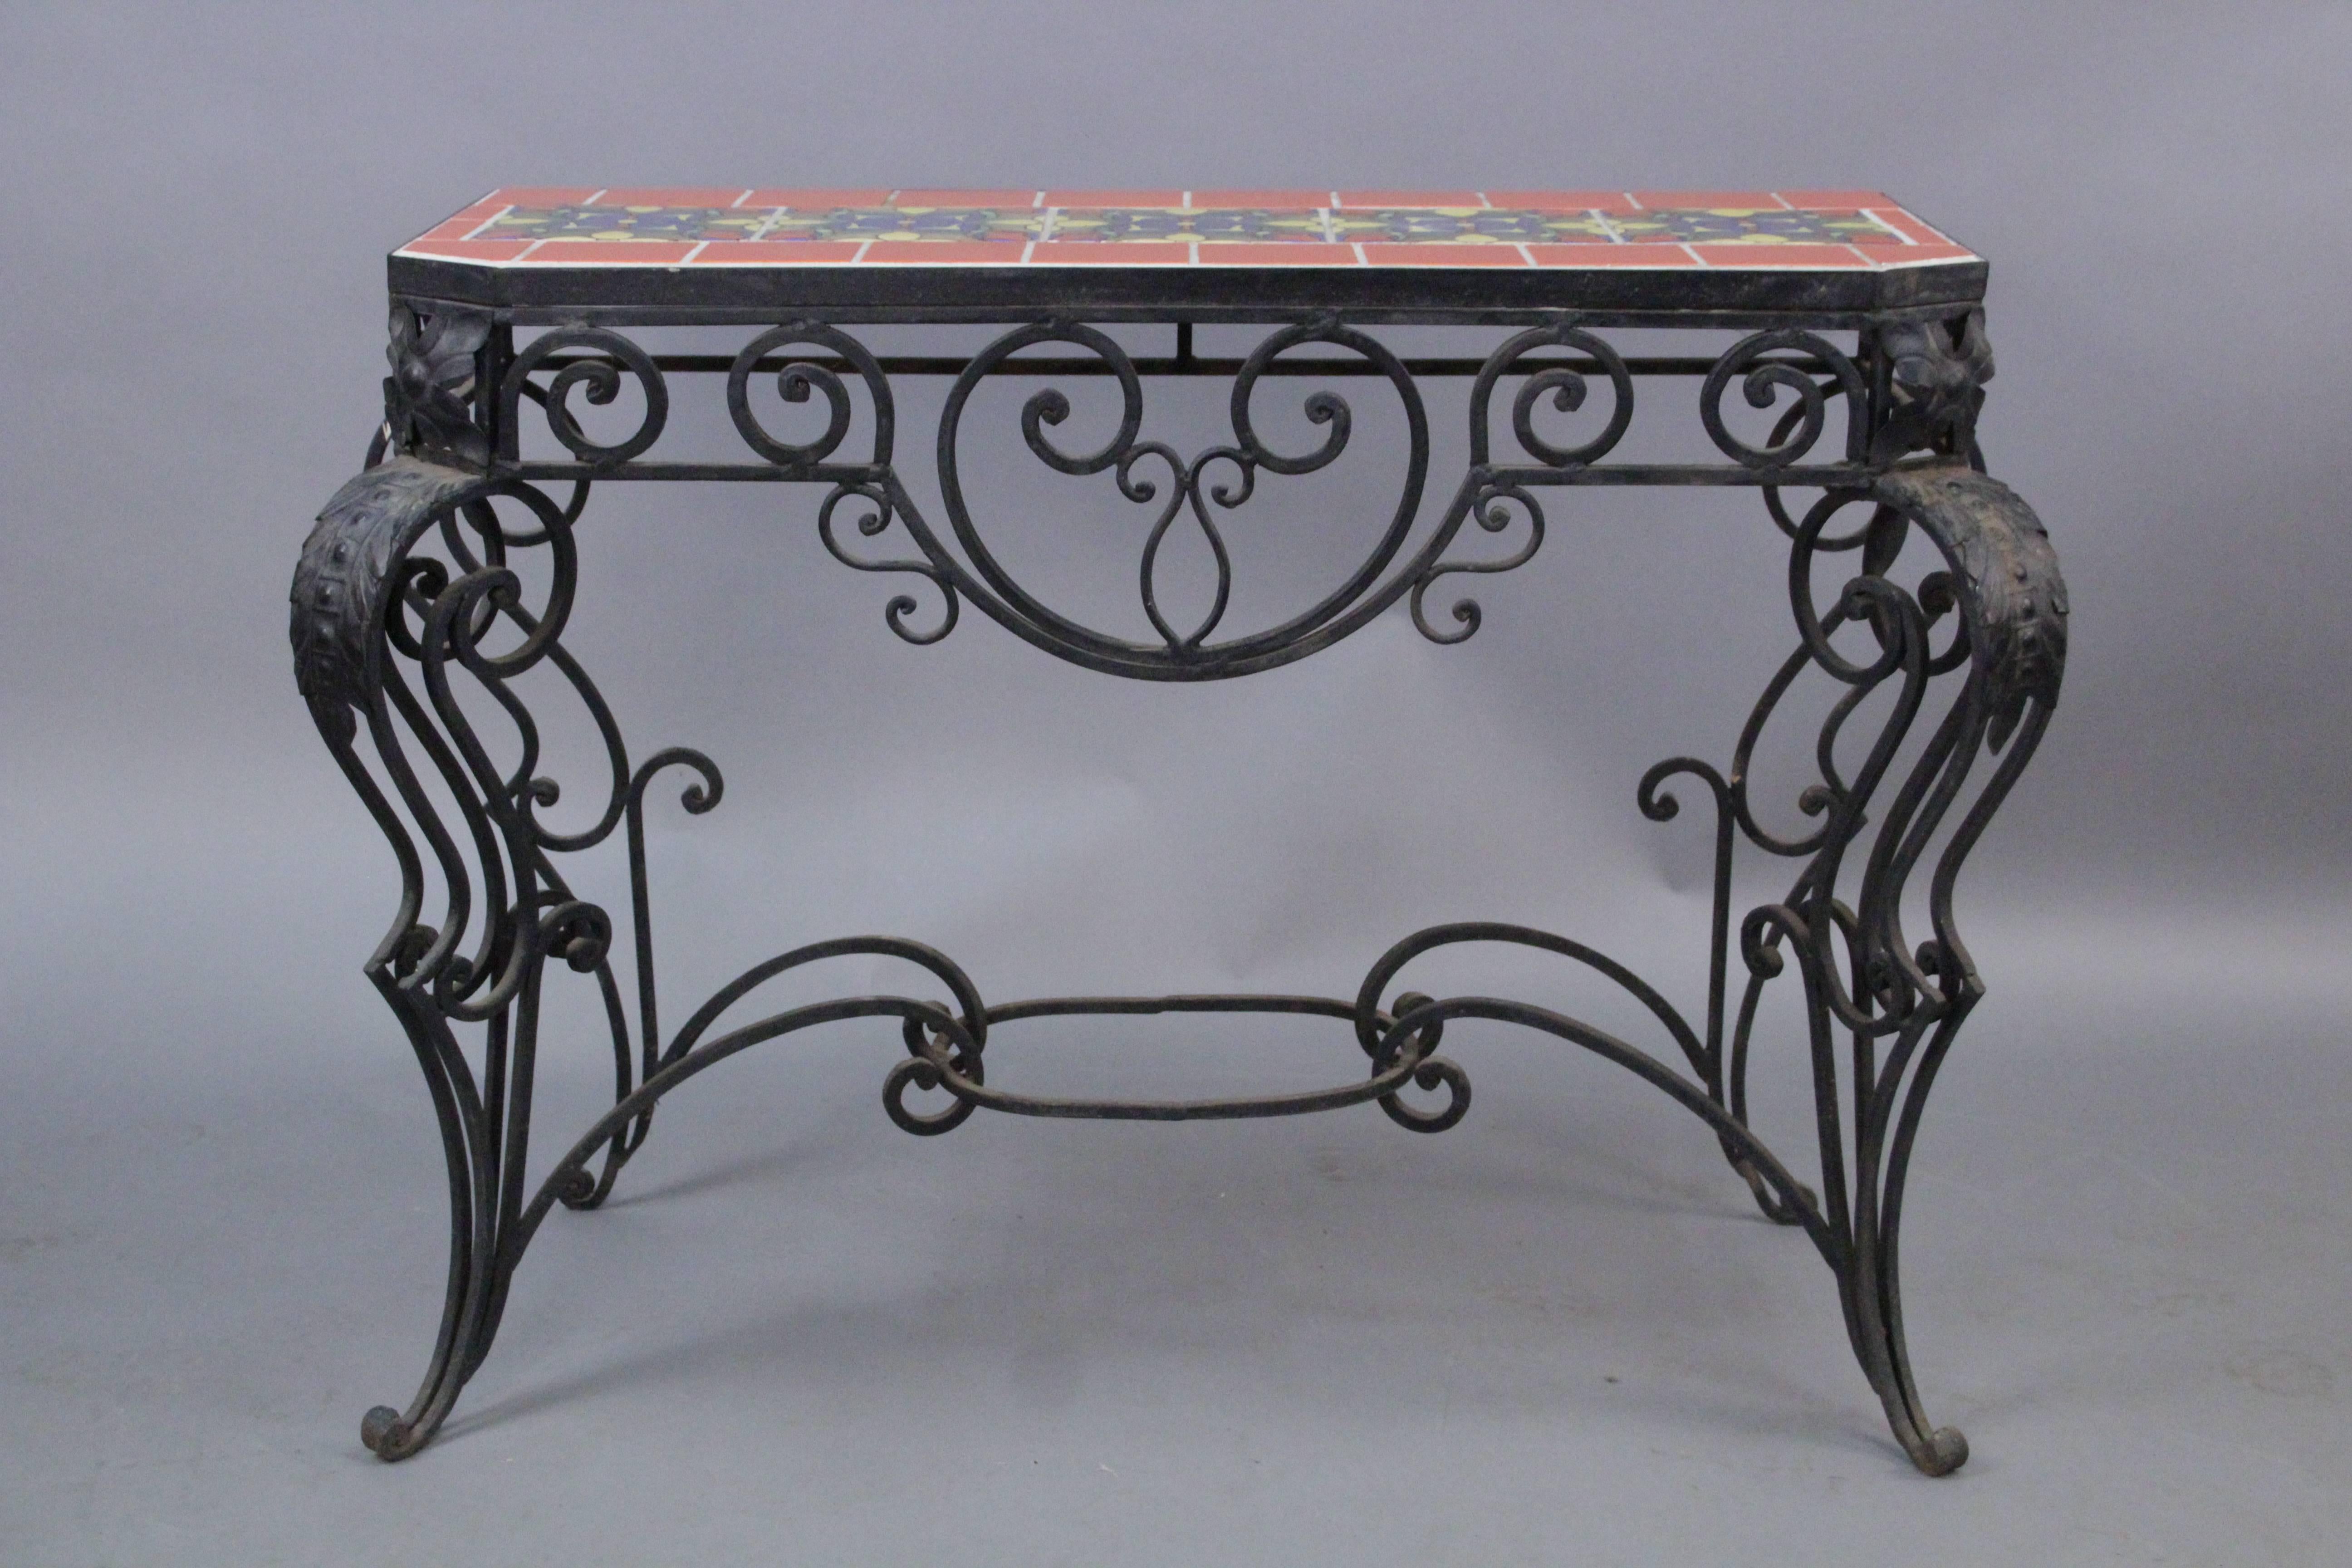 Spanish Colonial 1920s Wrought Iron Console Table with Malibu California Tiles